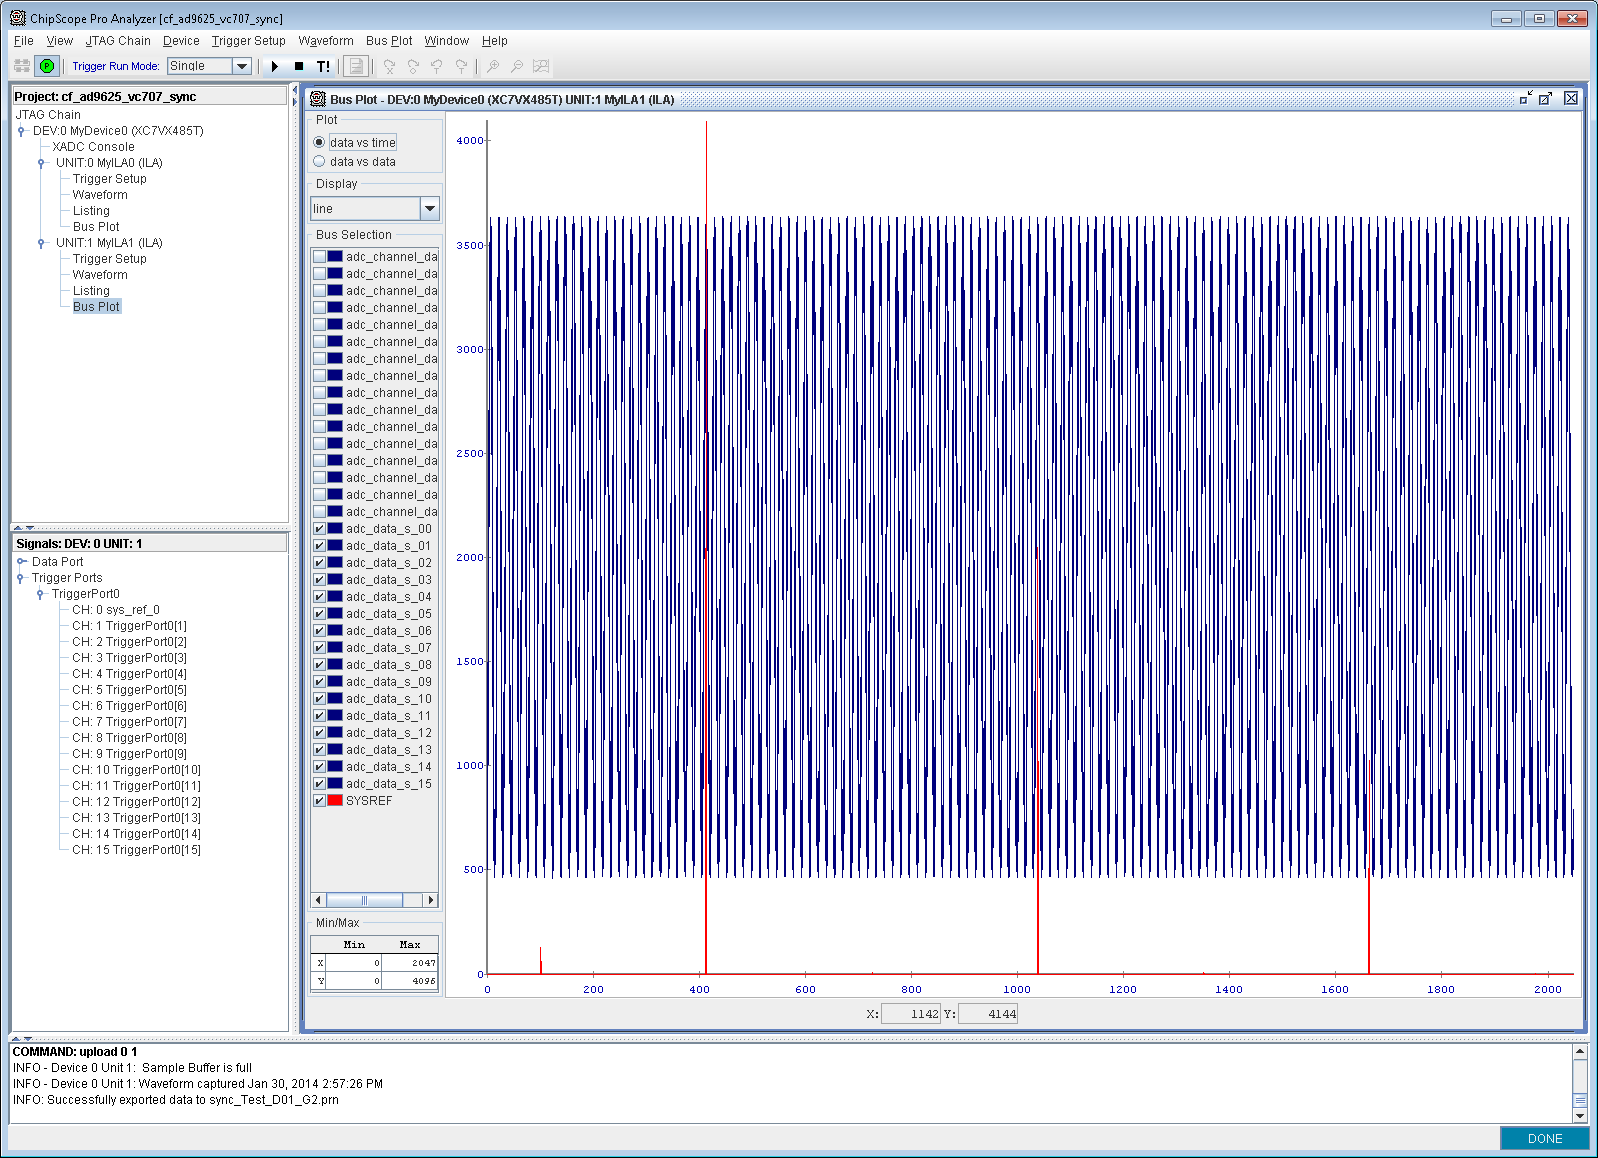 Figure 2 - Xilinx Chipscope screen capture displaying a triggered data capture with SYSREF